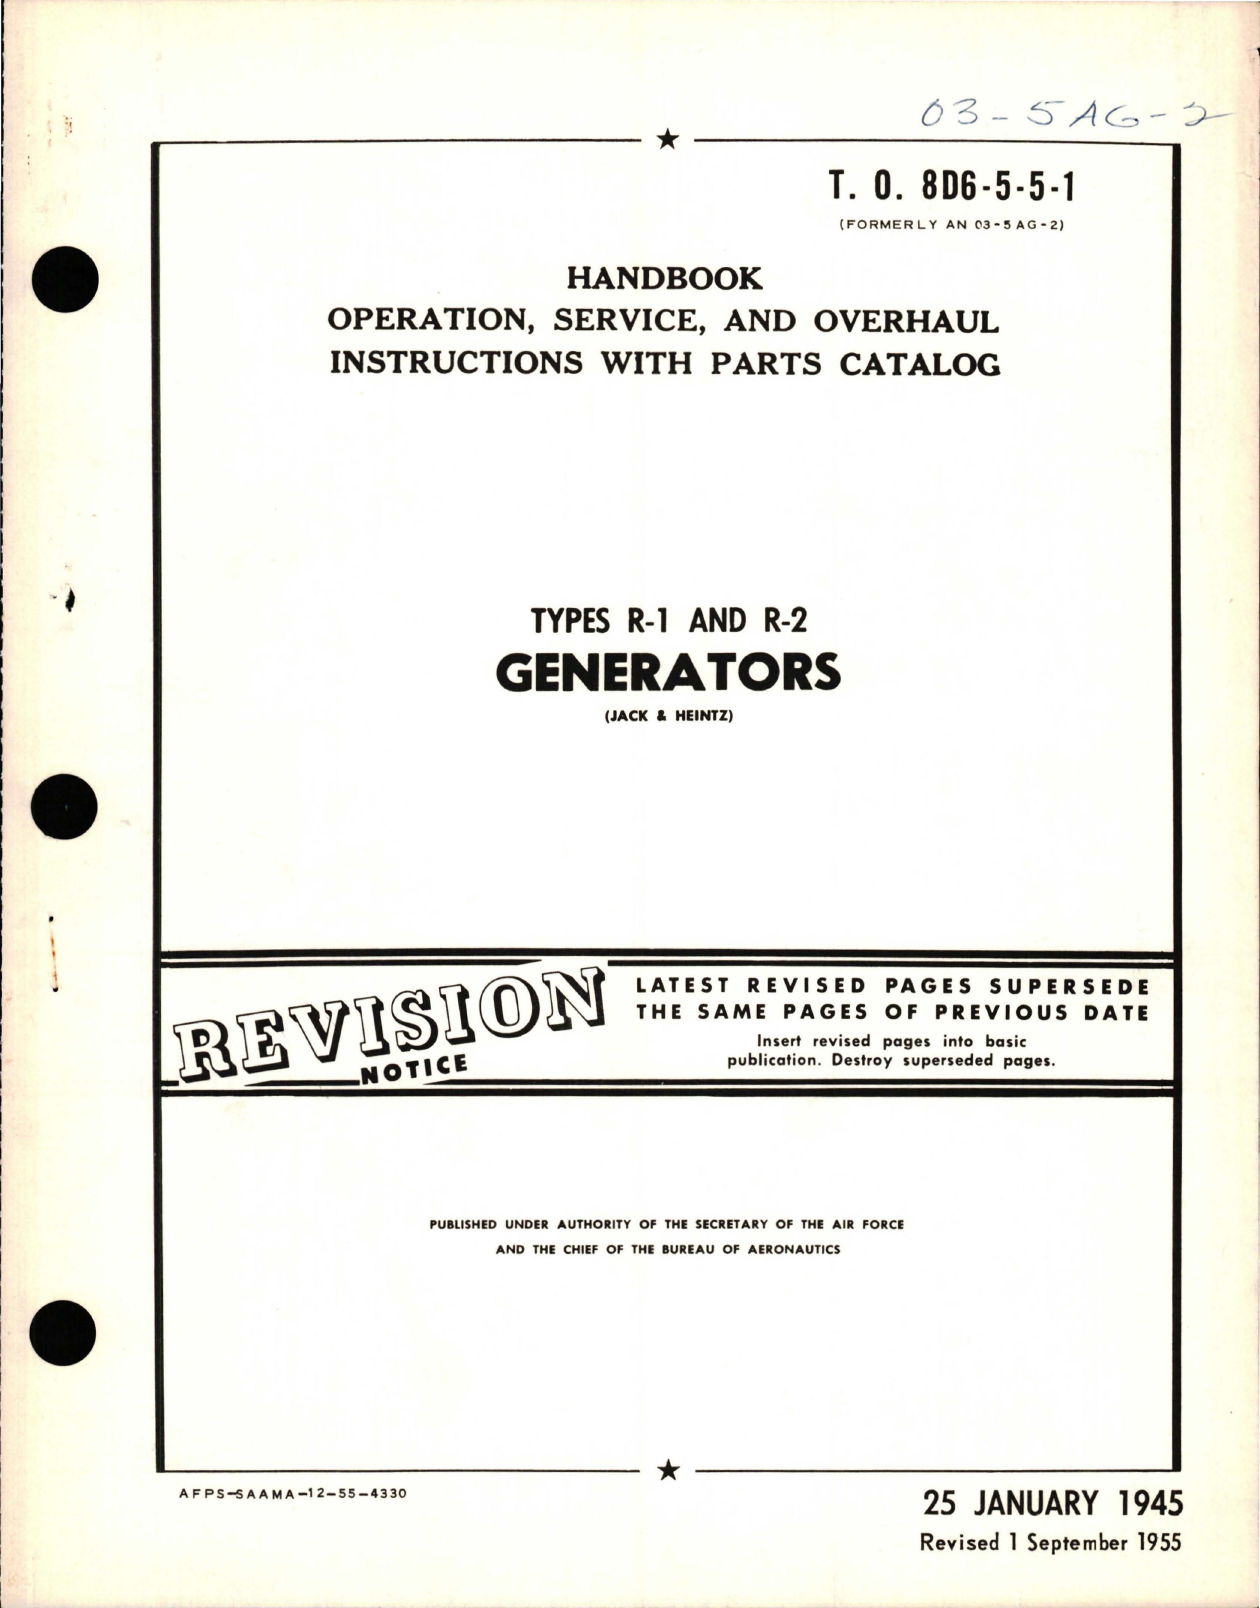 Sample page 1 from AirCorps Library document: Operation, Service and Overhaul Instructions with Parts Catalog for Generators - Types R-1 and R-2